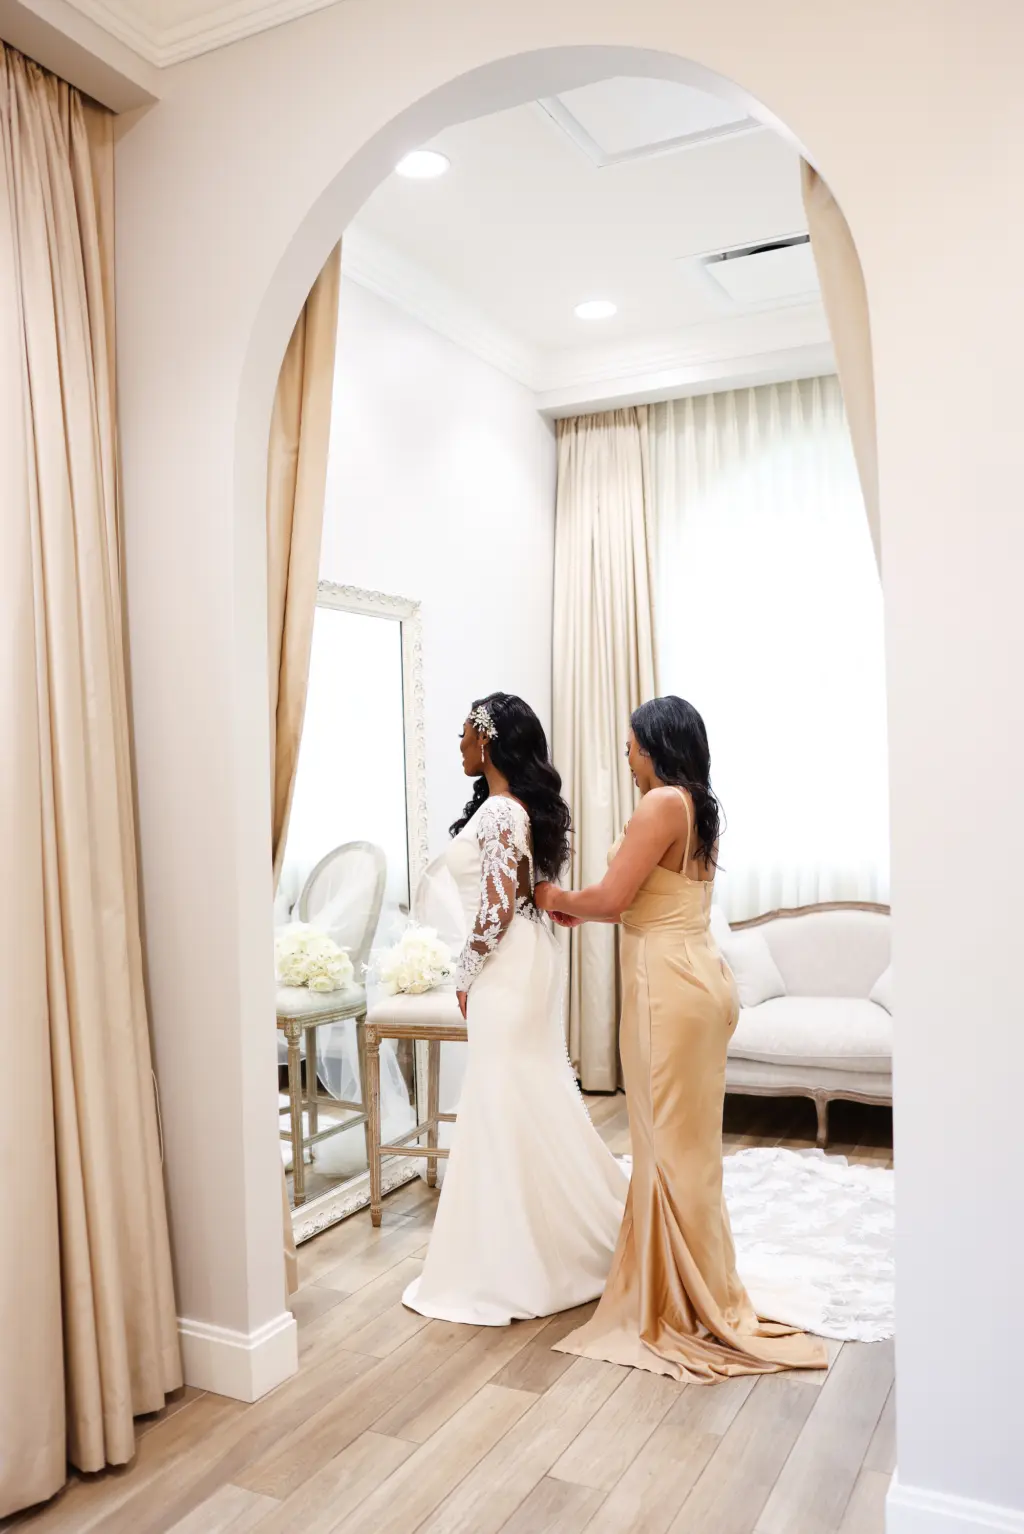 Bride and Bridesmaid Getting Ready | Sheer Lace Long Sleeve Fit and Flare Wedding Dress Ideas | Satin Champagne Bridesmaid Dress Inspiration | Safety Harbor Venue Harborside Chapel